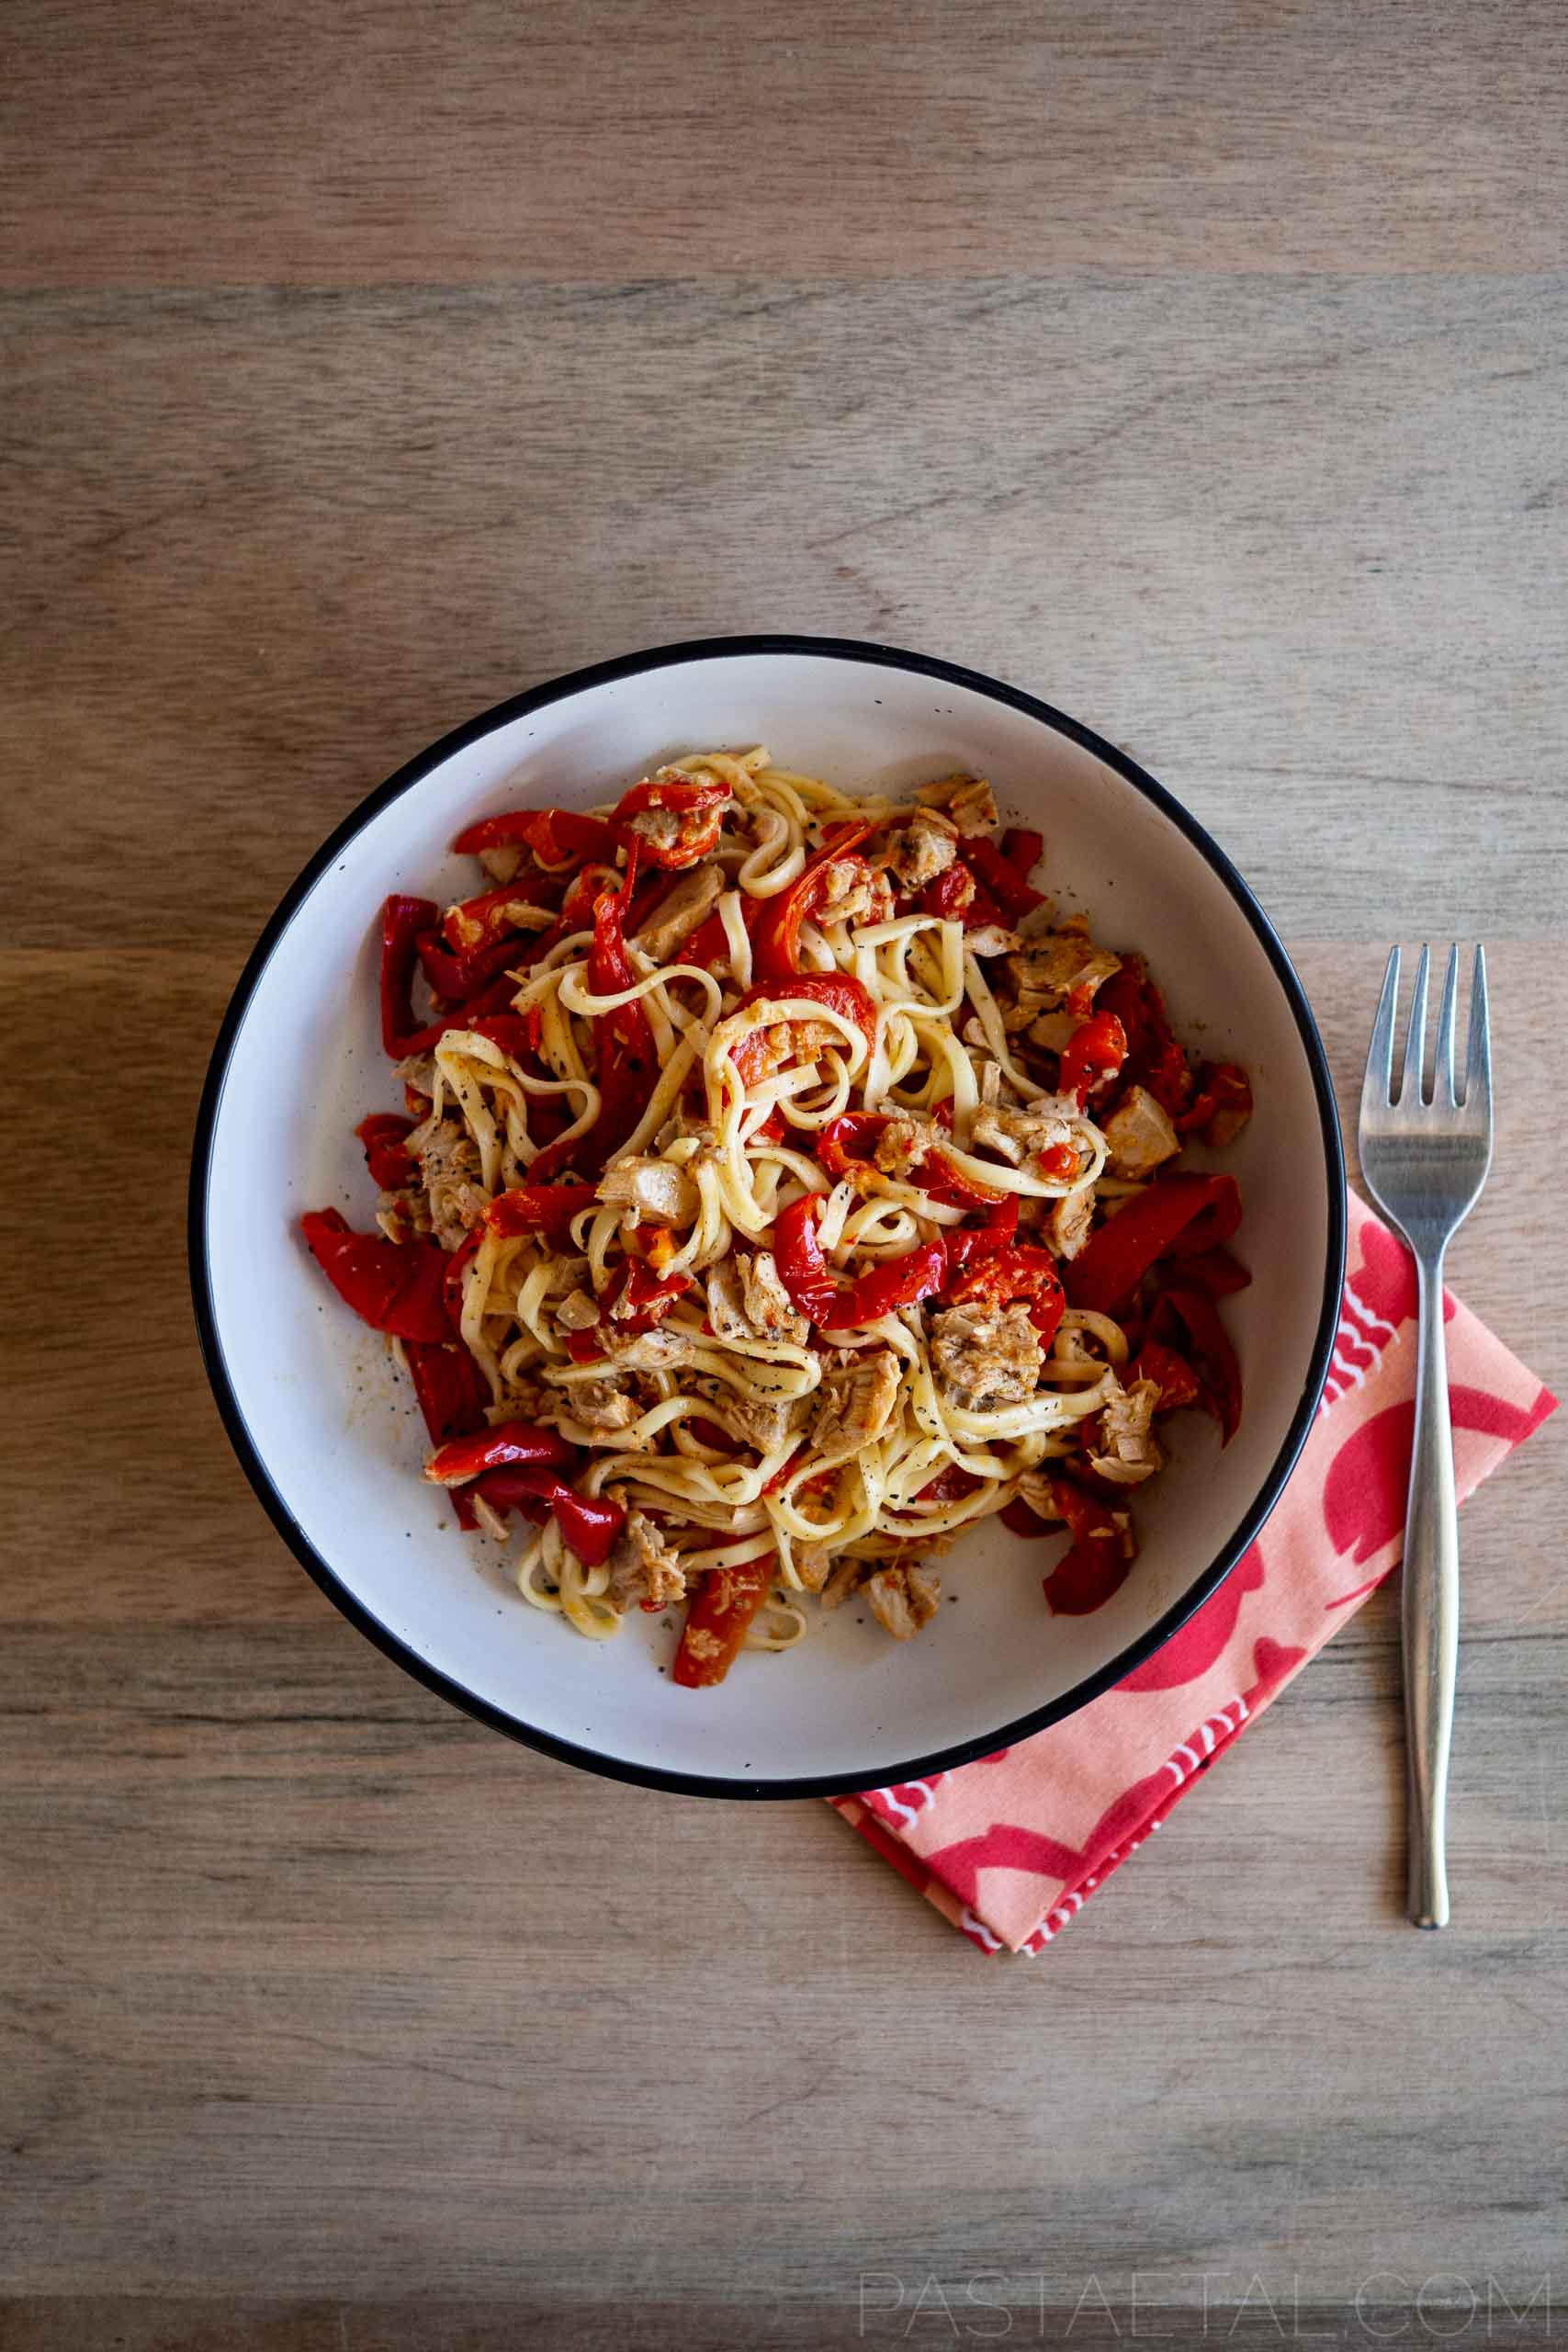 https://pastaetal.com/wp-content/uploads/2021/04/spaghetti-alla-chitarra-with-capsicum-and-homemade-tuna-in-oil-on-a-chopping-board.jpg